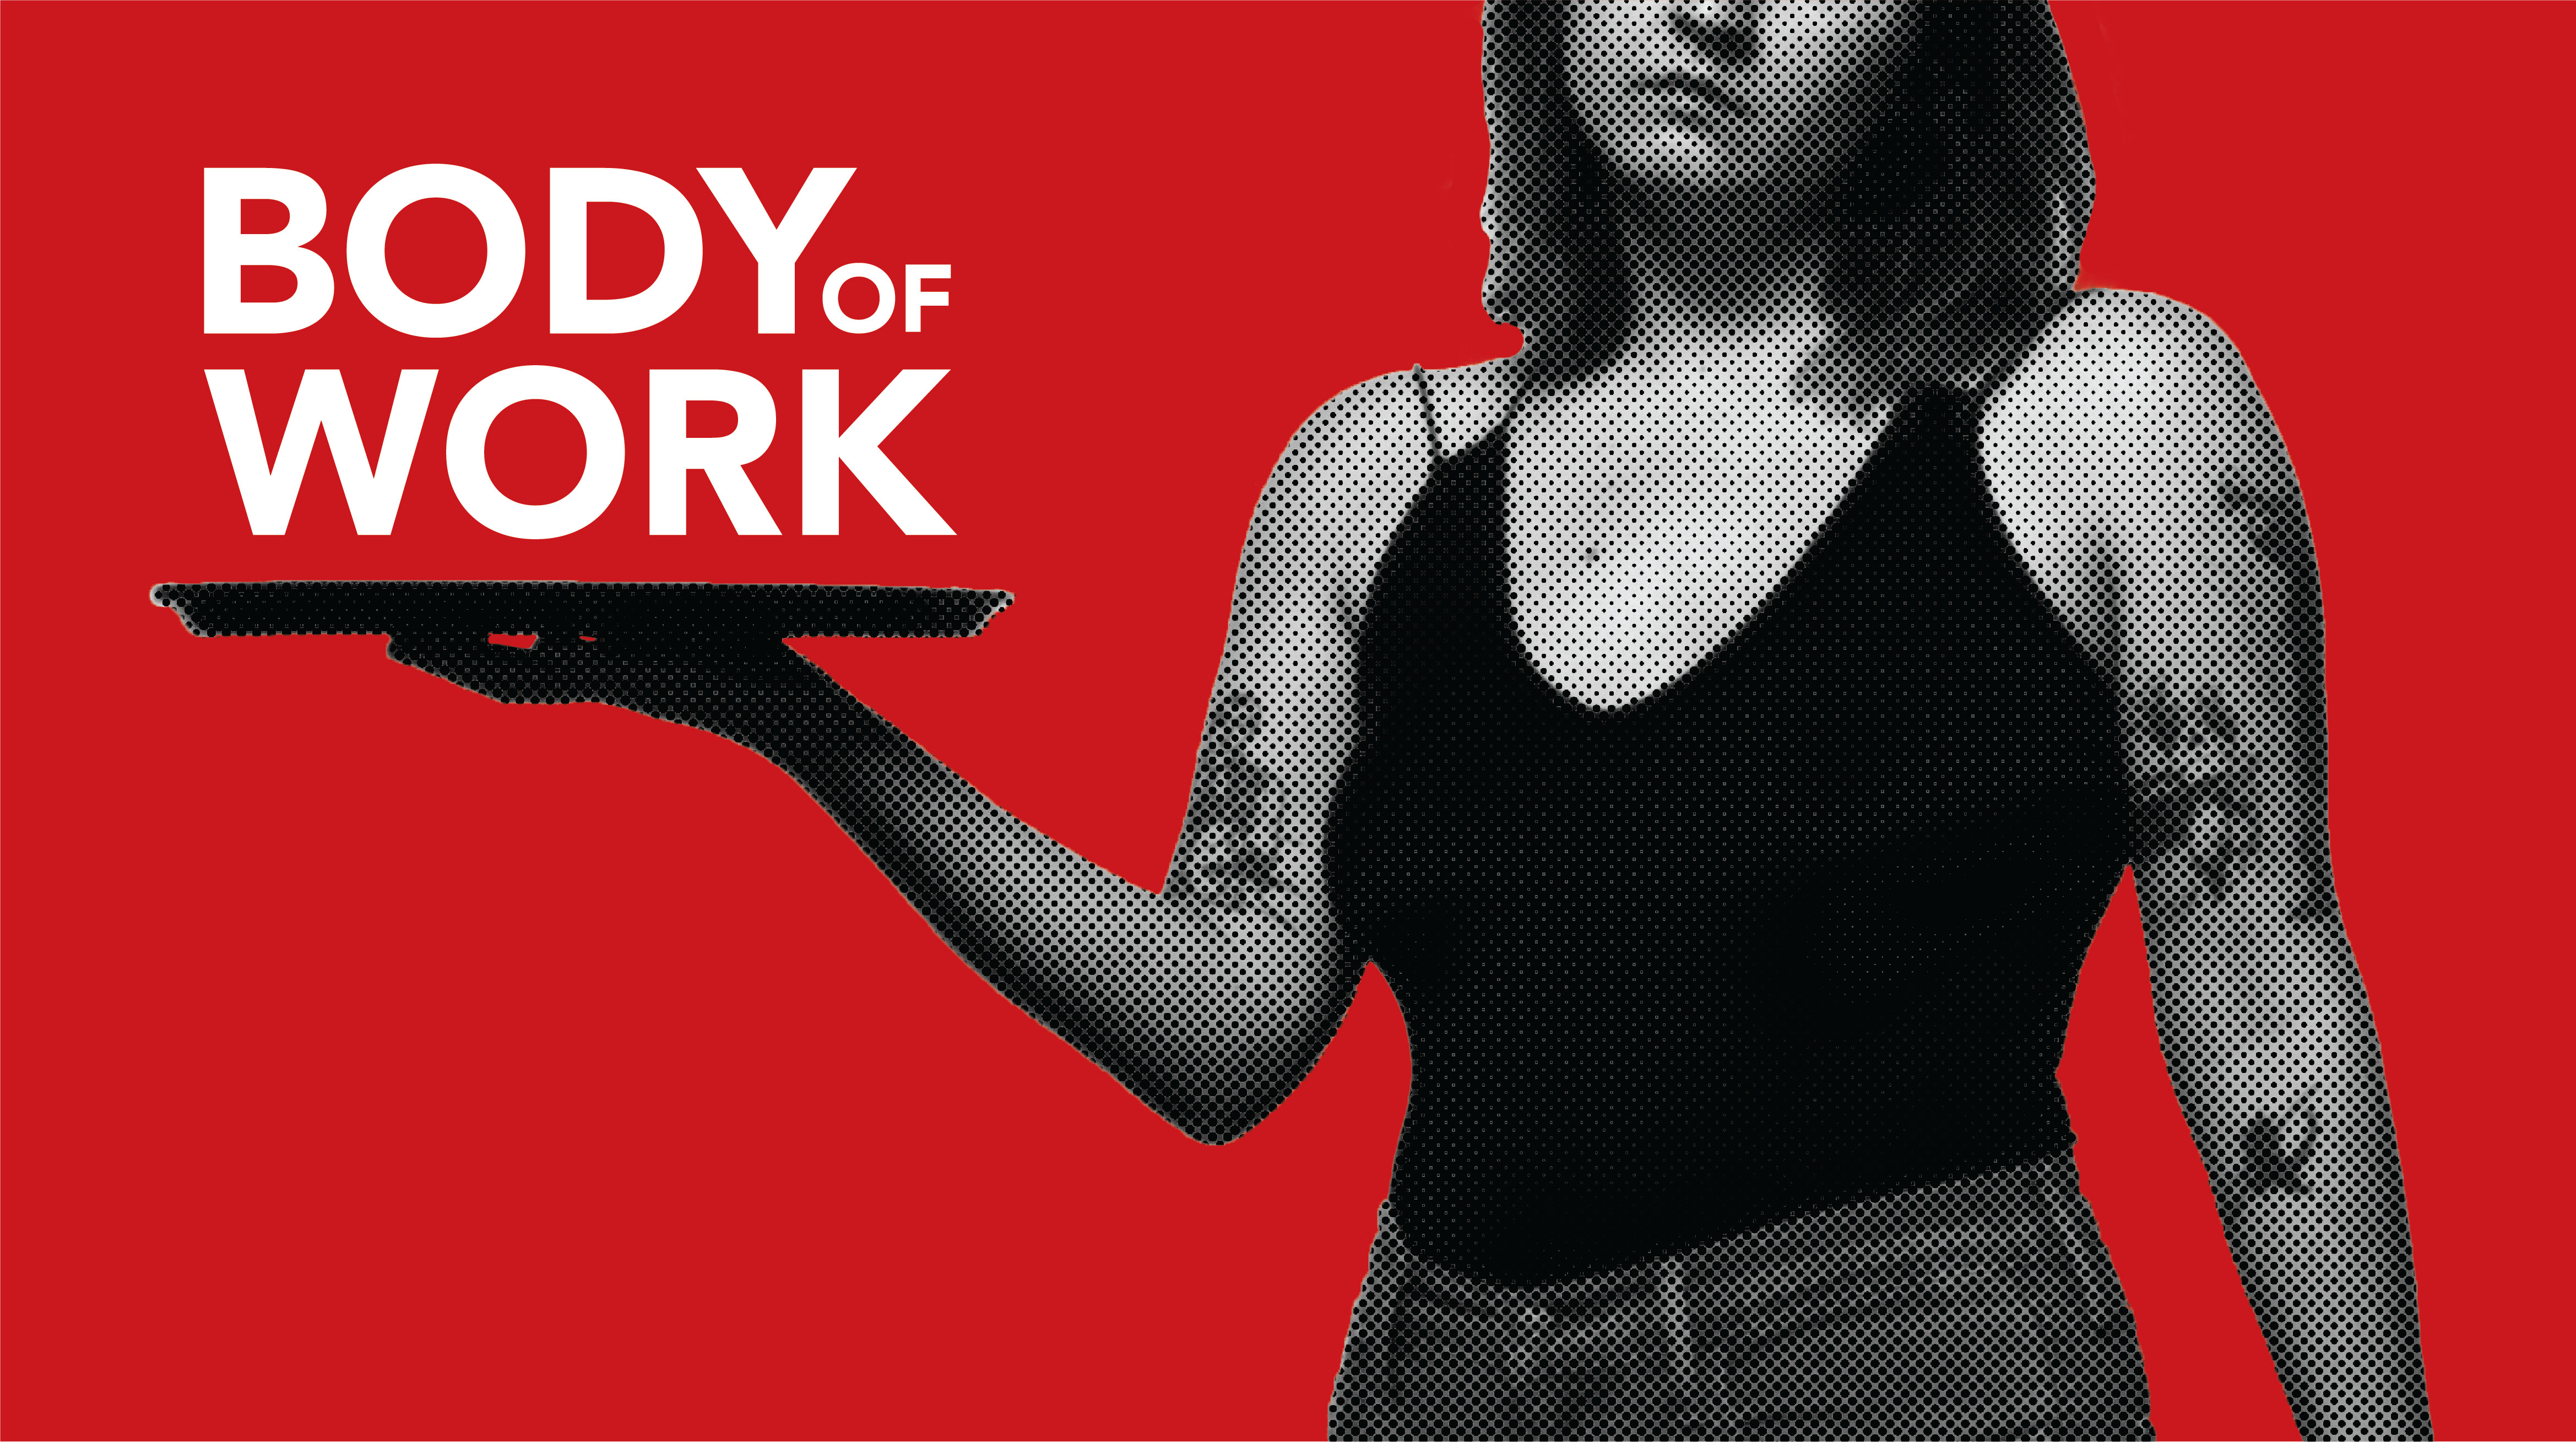 Body of Work: Katie Kiesewetter MA Exhibition & Zine Release May 9-14 8:00am-8:00pm E260 (Ana Mendieta Gallery) Visual Arts Building